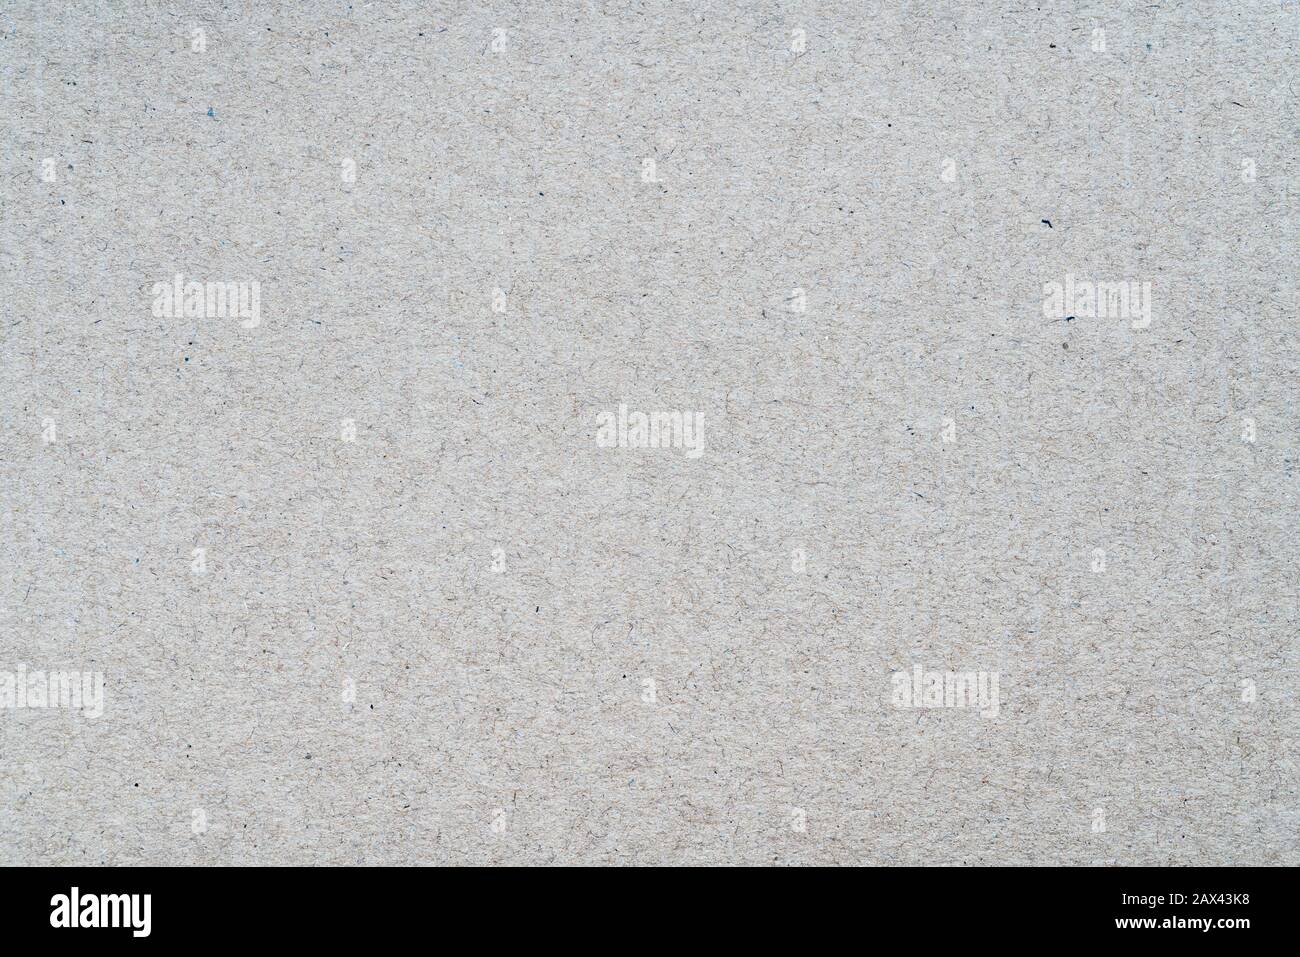 Light gray pattern from sheet of recycled carton. Close-up detail photomicrography view of abstract texture recycled eco-friendly cardboard material Stock Photo